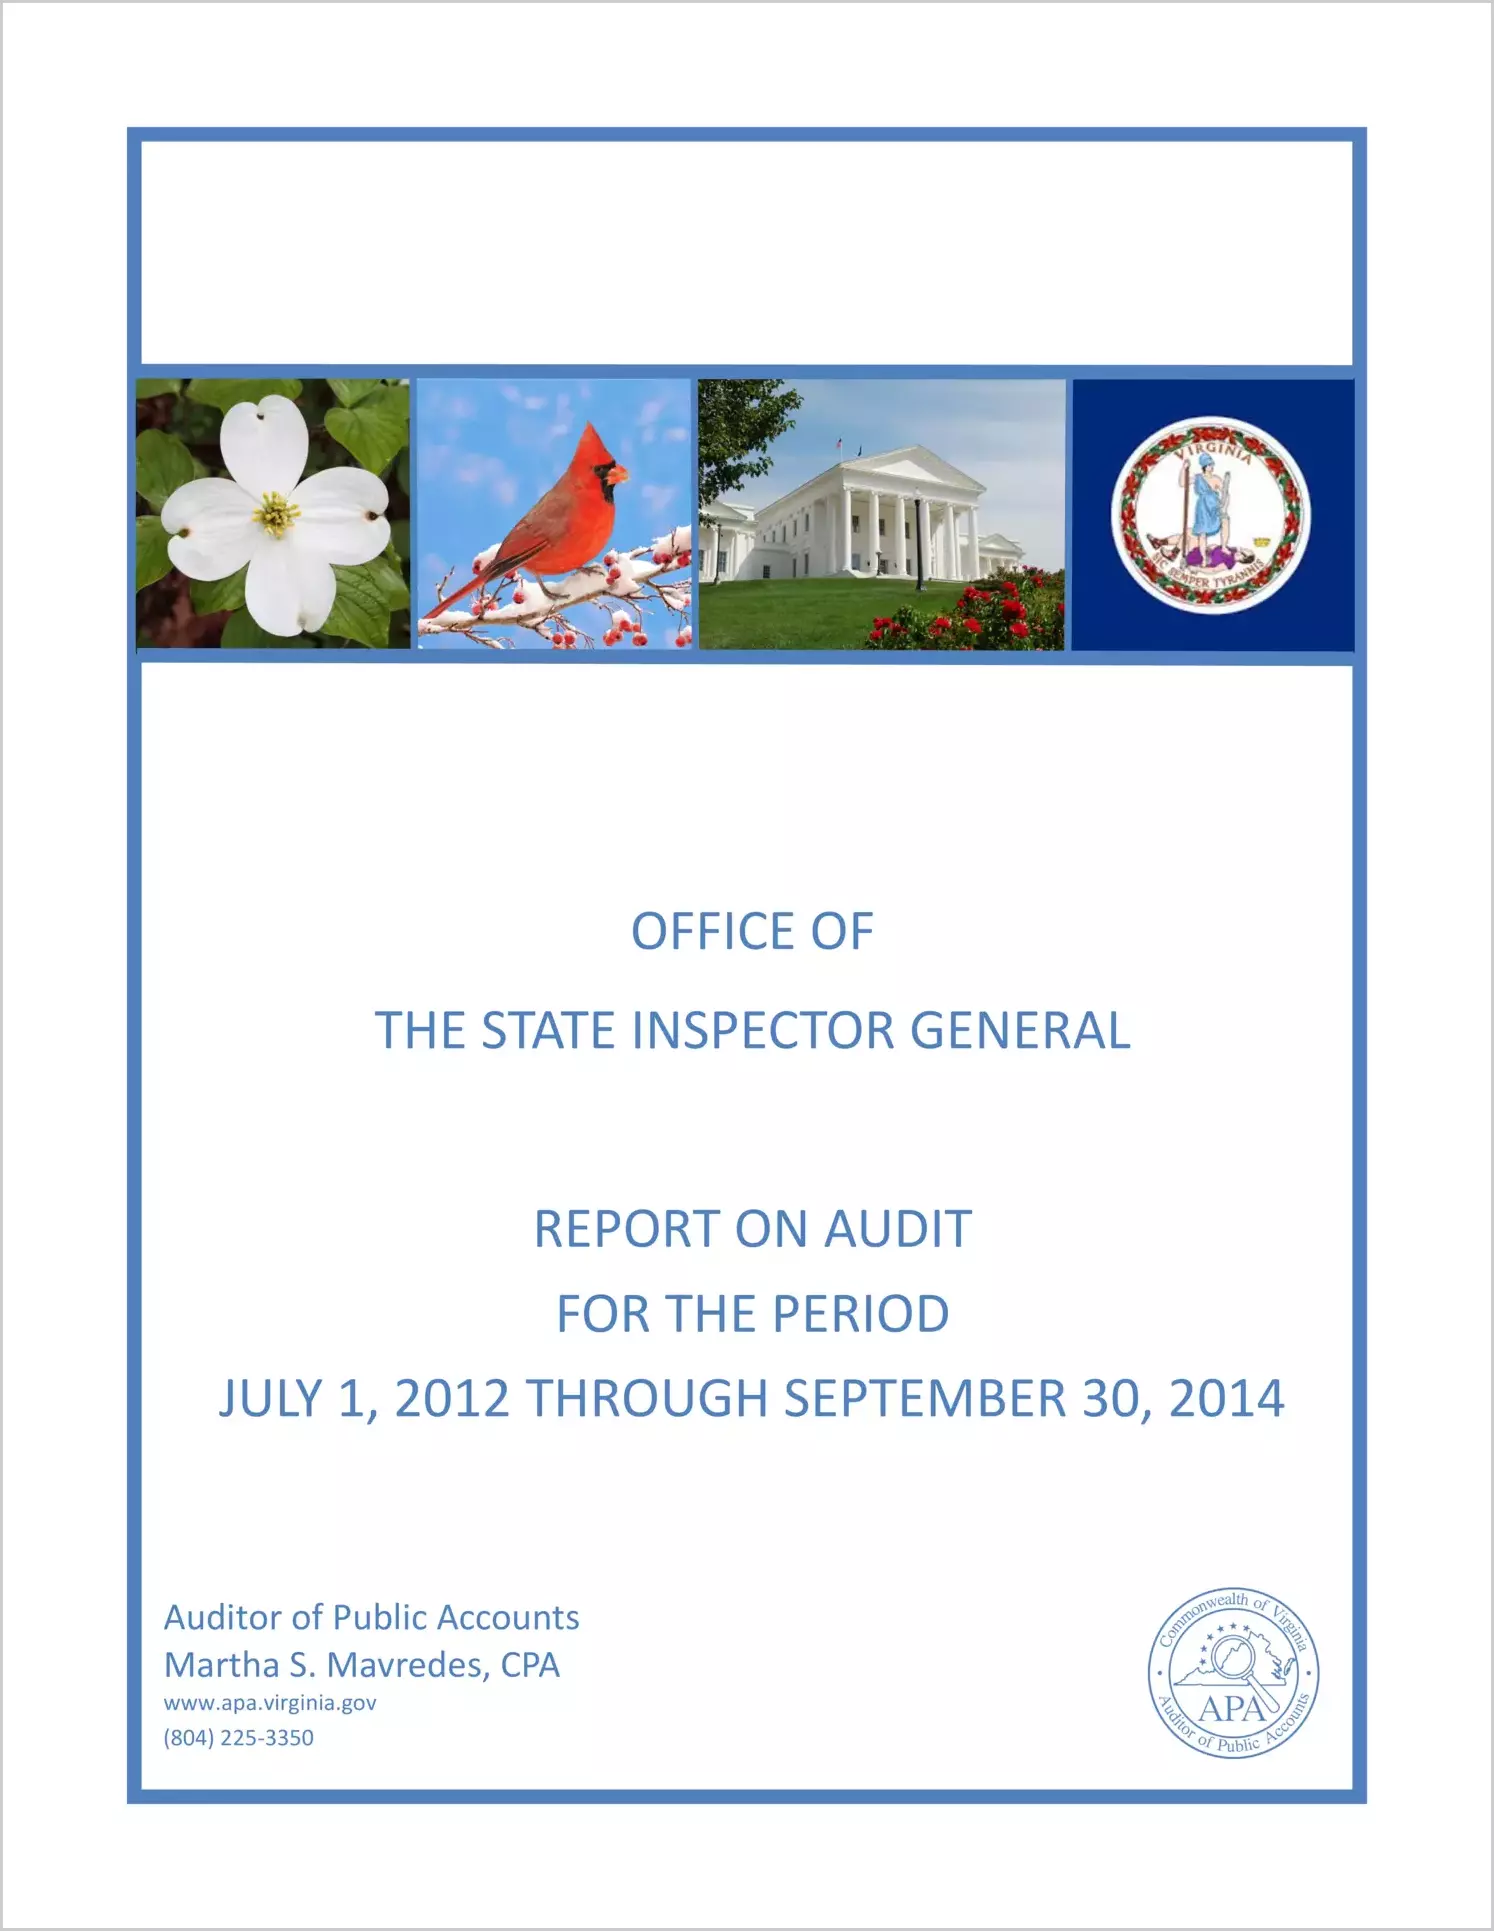 Office of the State Inspector General for the period July 1, 2012 through September 30, 2014